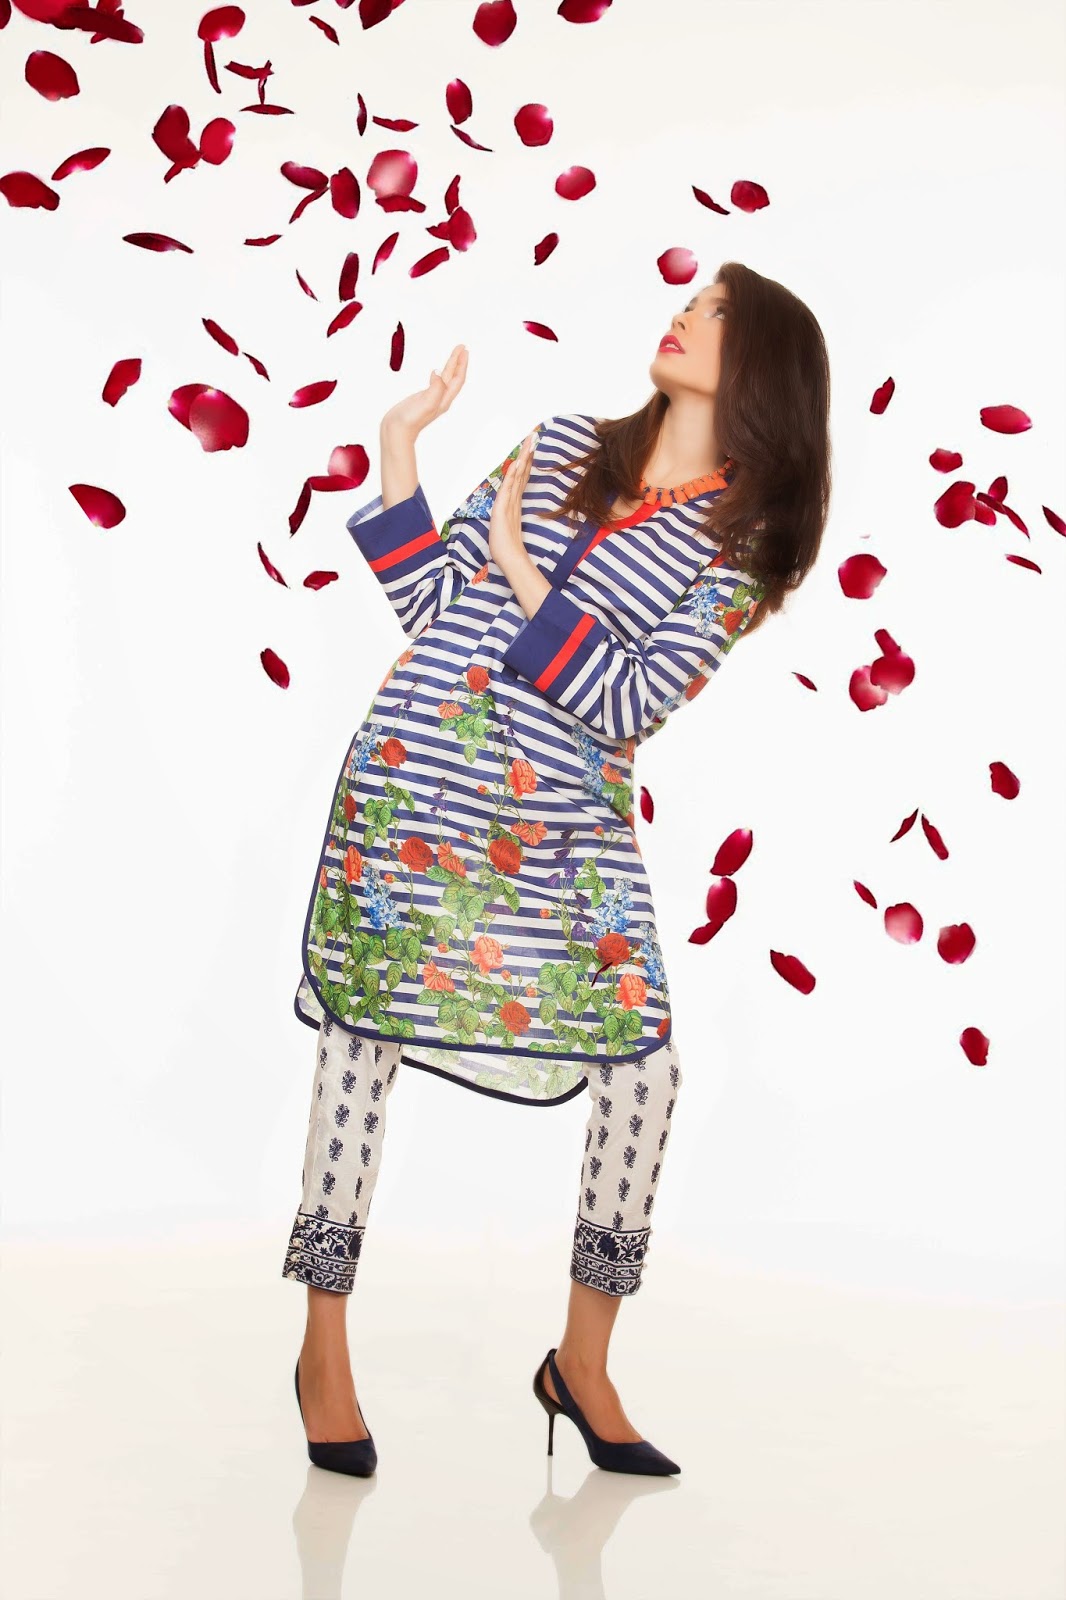 amna babar for sapphire's valentine's collection